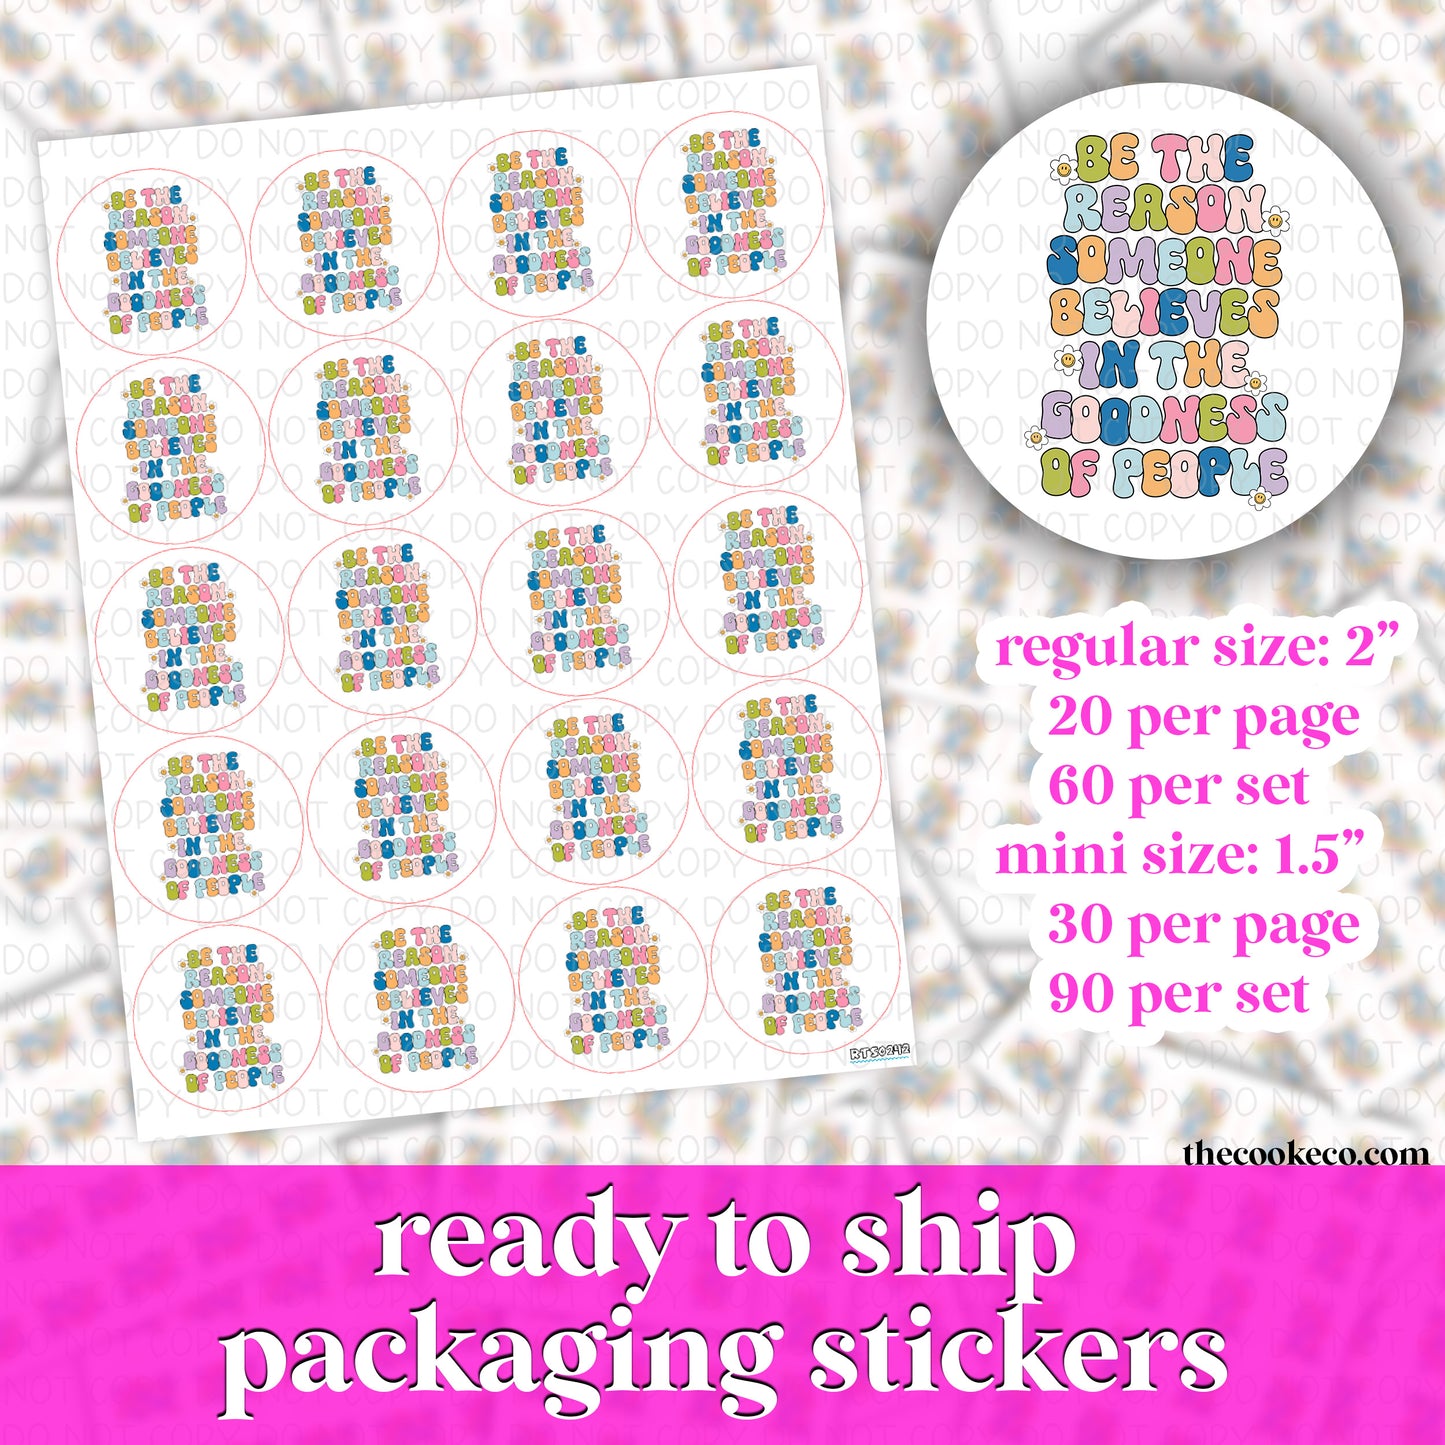 PACKAGING STICKERS | #RTS0242 - BE THE REASON SOMEONE BELIEVES IN THE GOODNESS OF PEOPLE